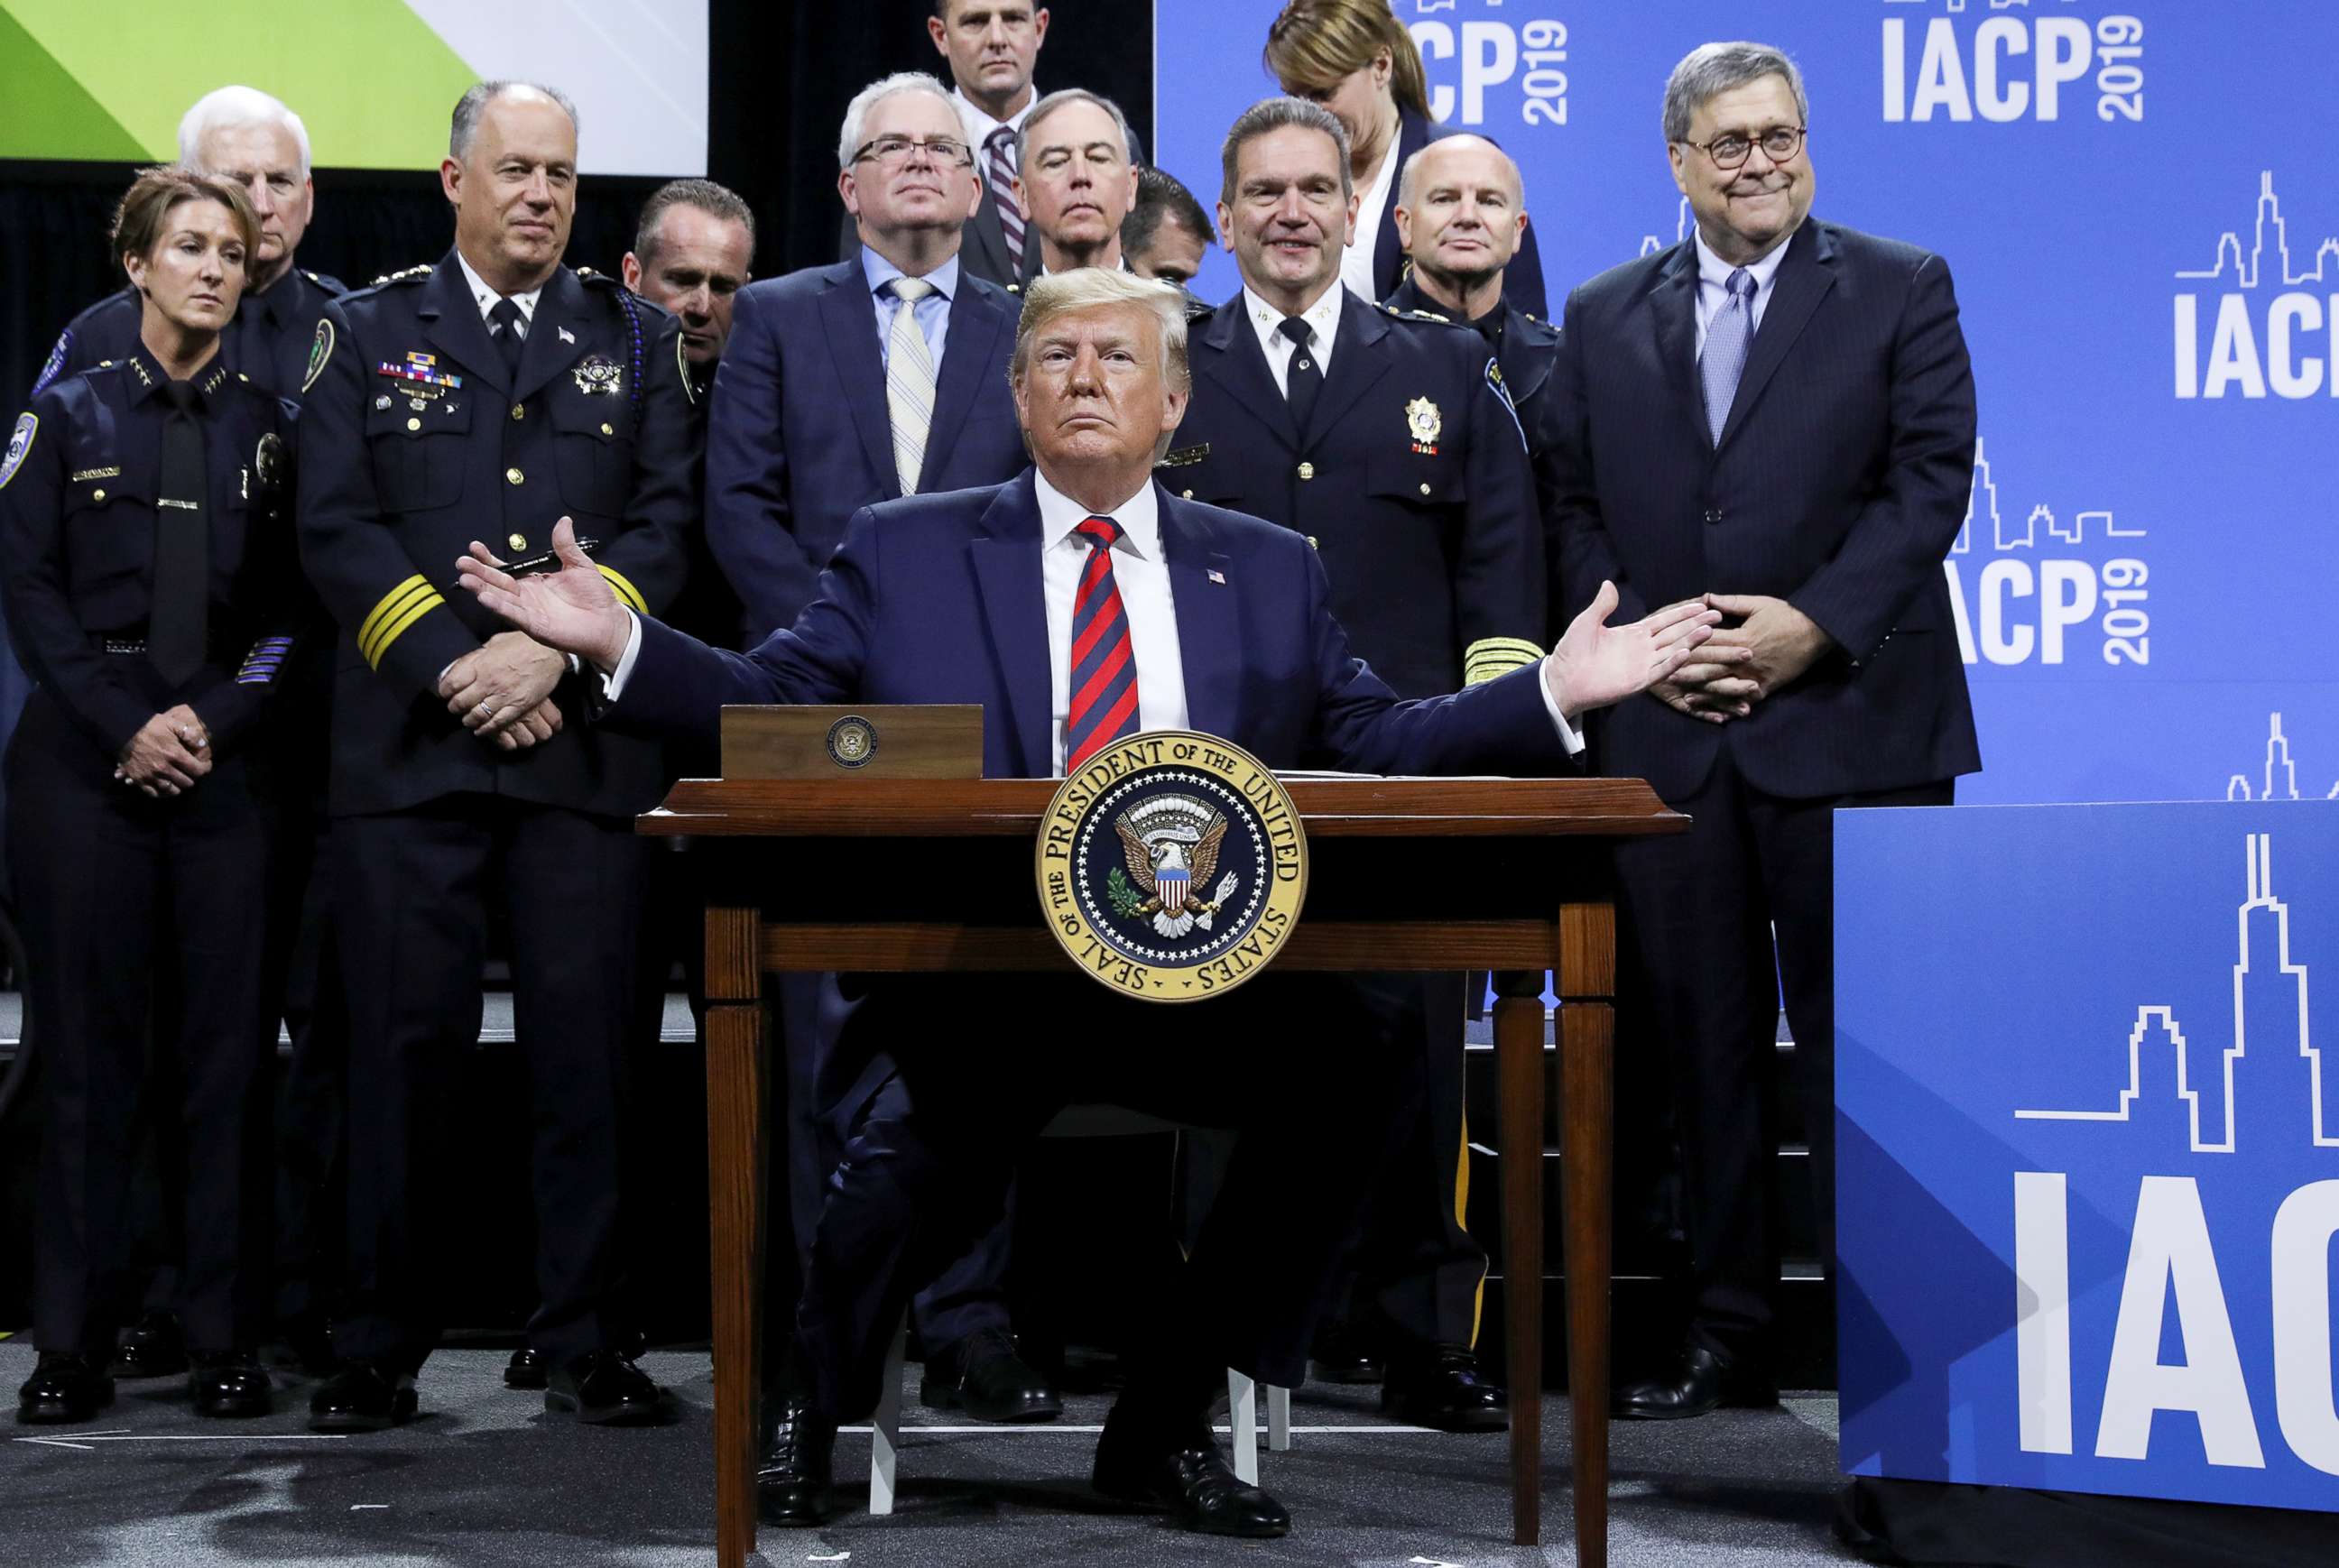 PHOTO: President Donald Trump reacts after signing an executive order during an appearance at the International Association of Chiefs of Police annual conference and expo in Chicago, Oct. 28, 2019. 